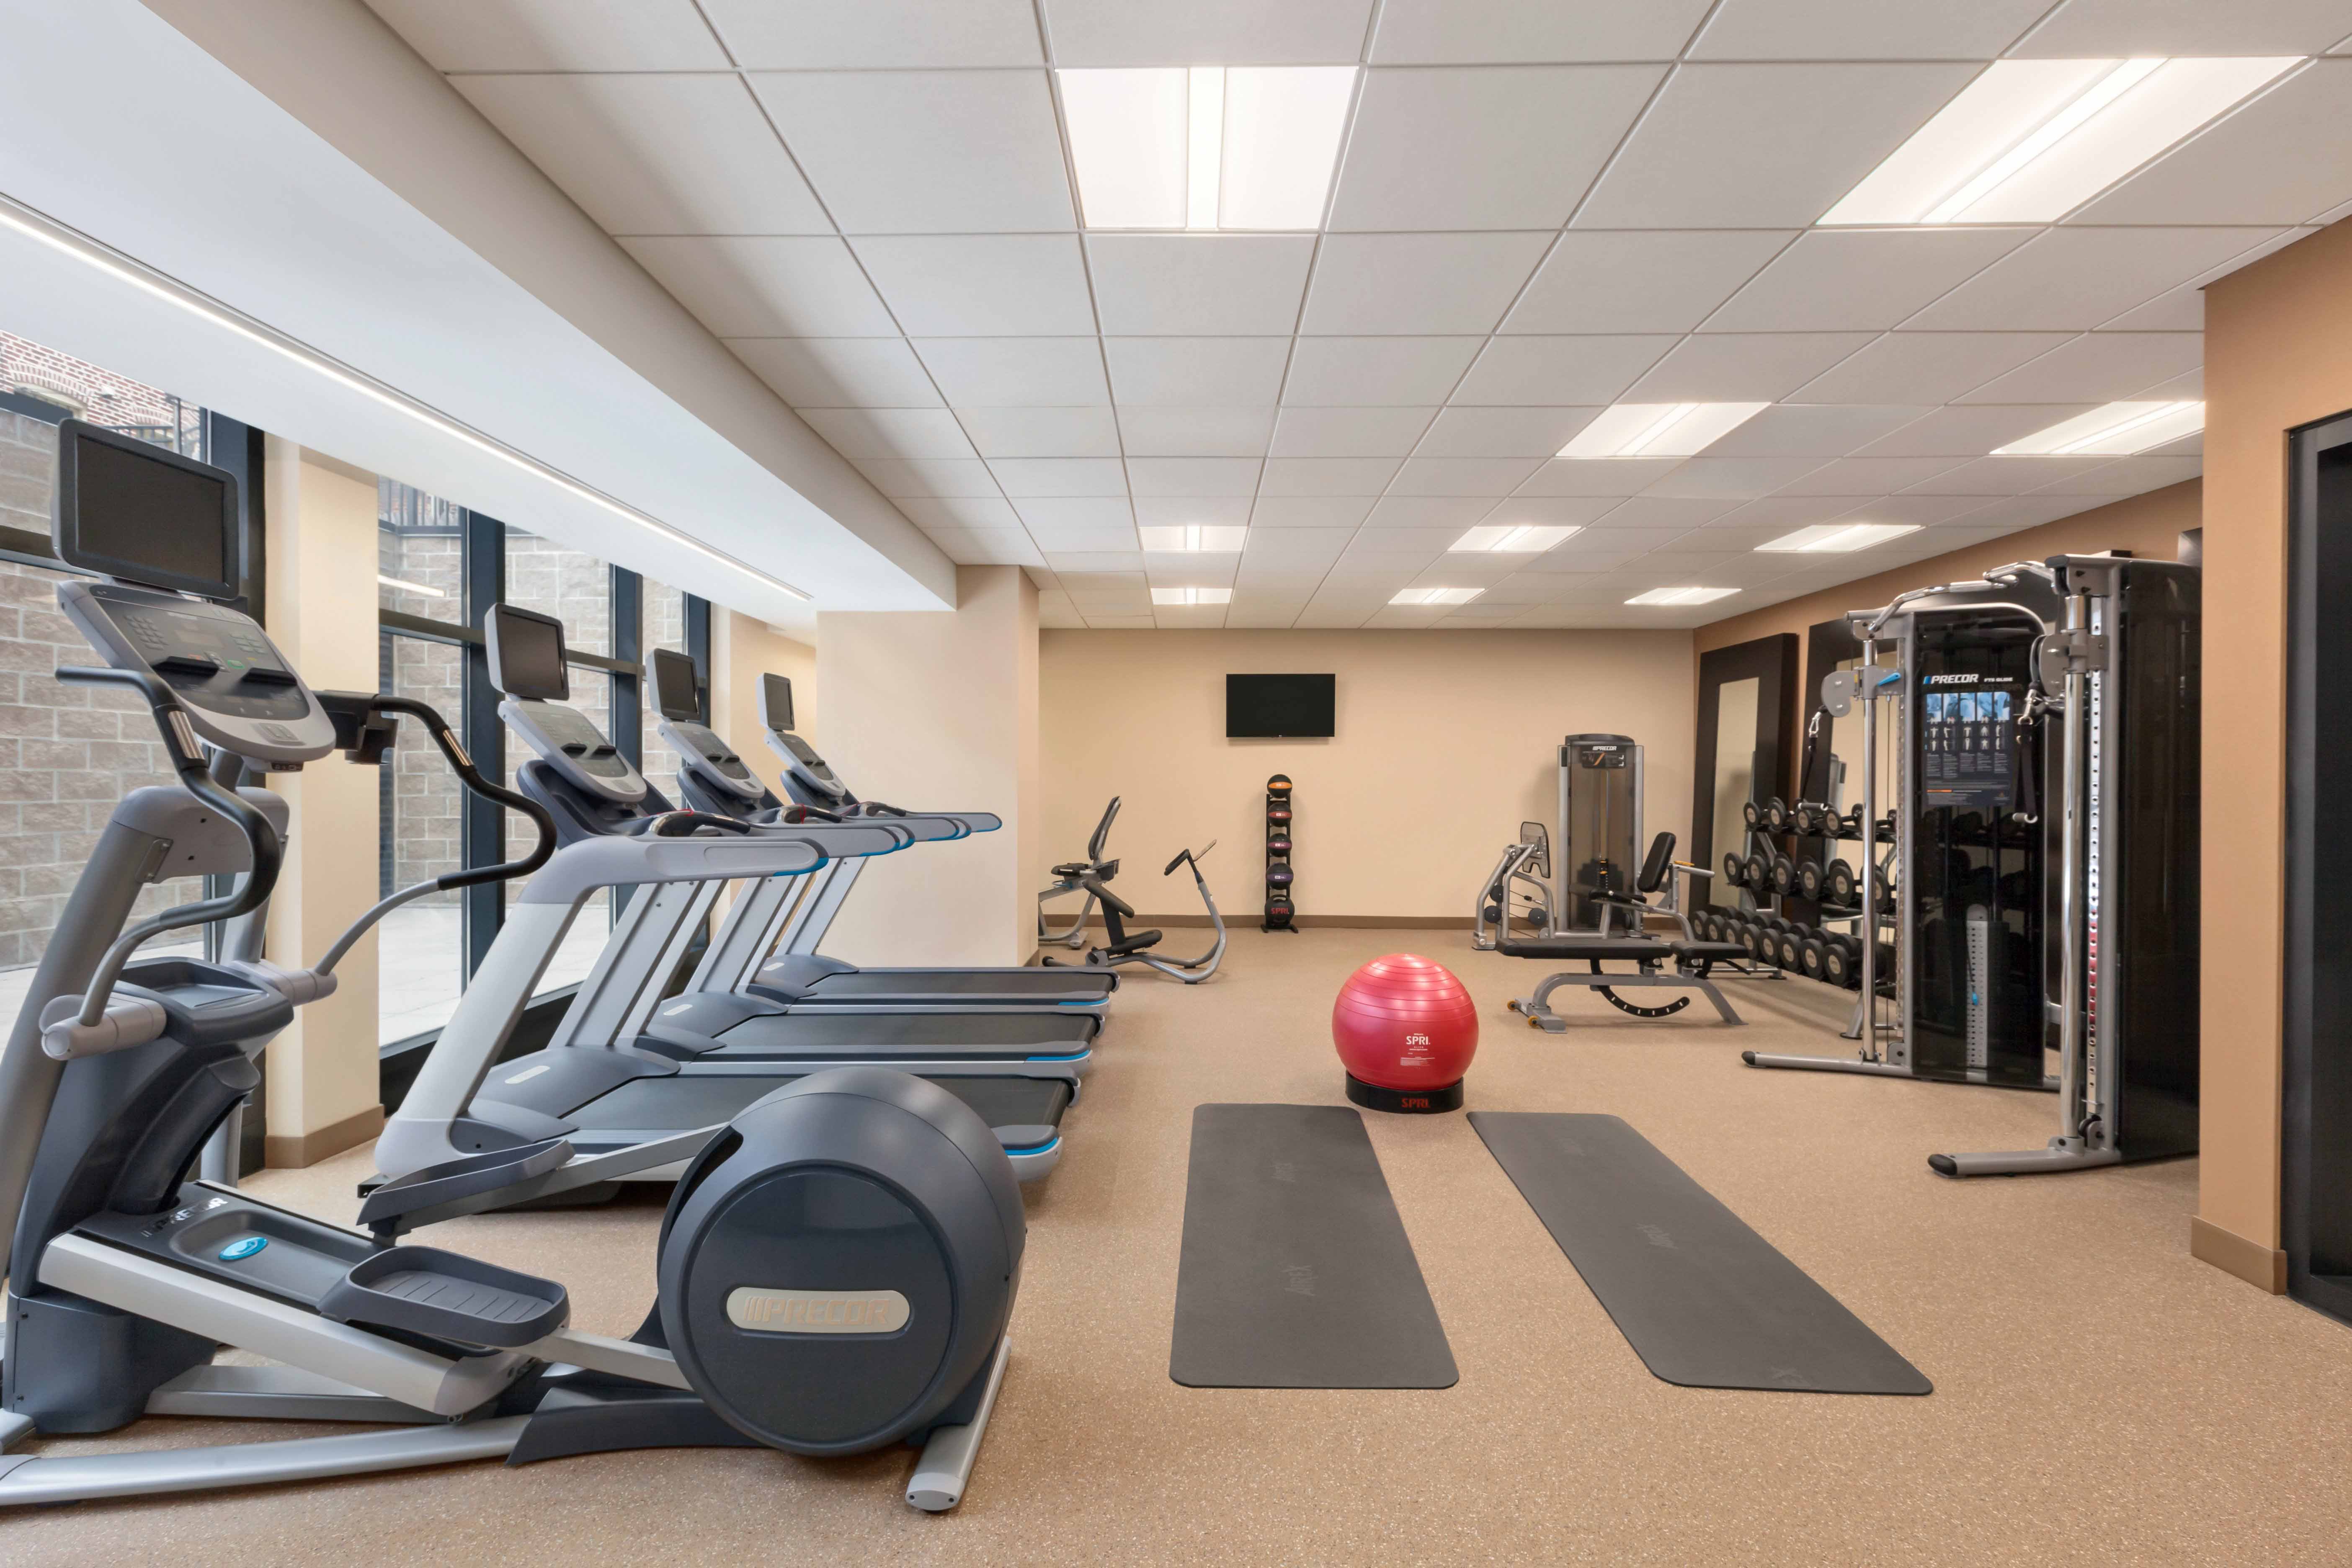 Cardio Equipment By Windows, Red Exercise Ball, TV, Weight Balls, Free Weights, and Weight Bench in Fitness Center